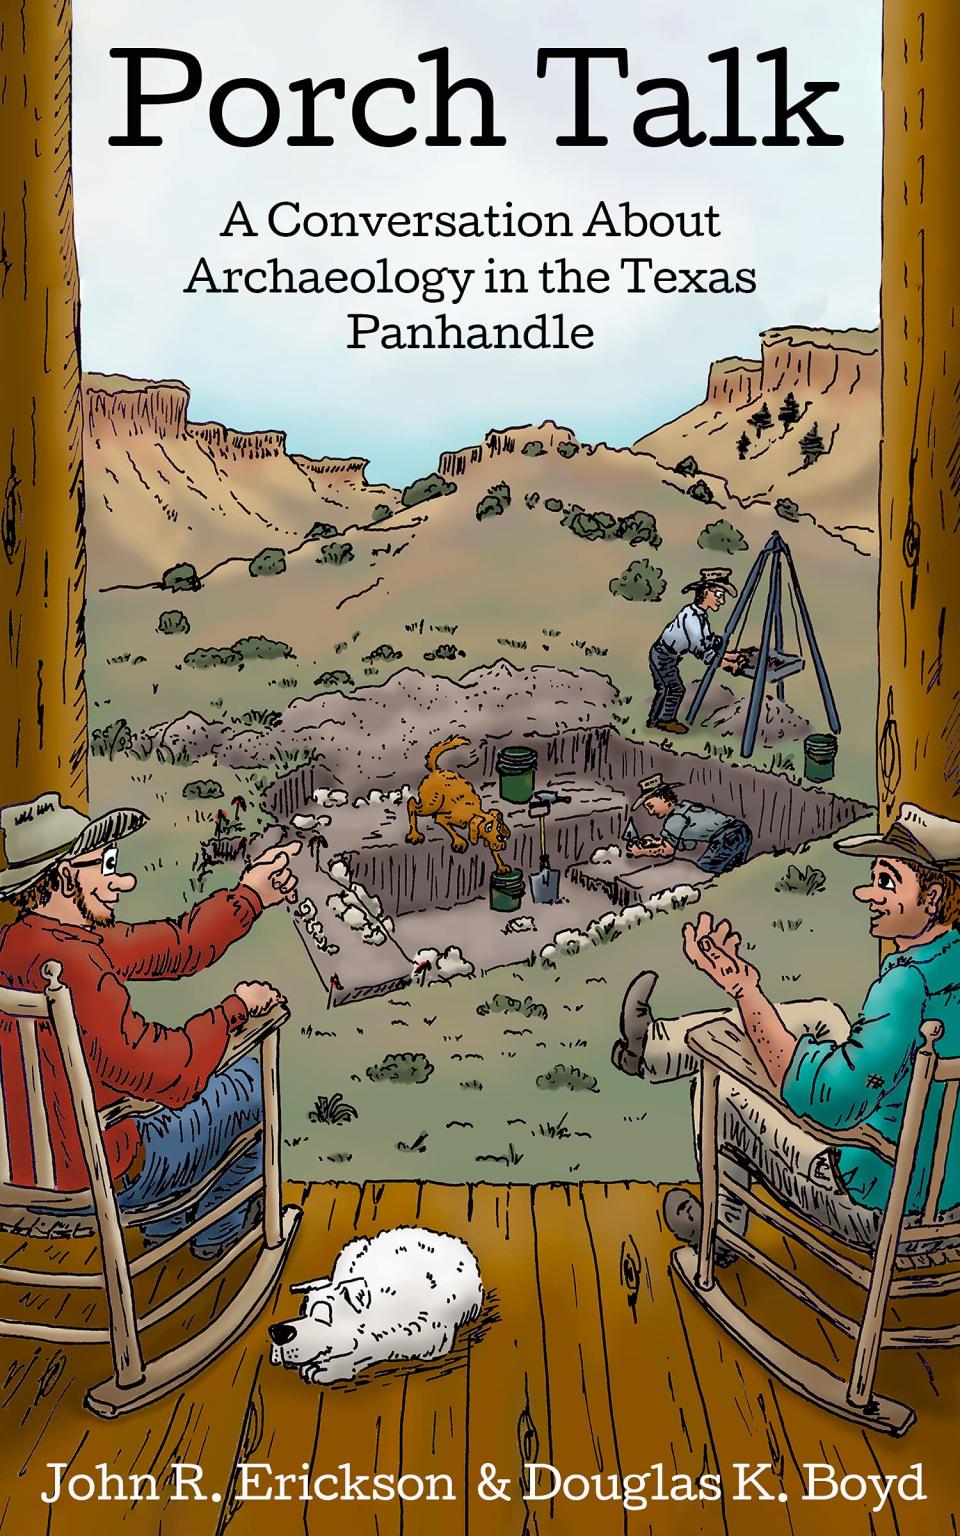 "Porch Talk: A Conversation About Archaeology in the Texas Panhandle" by John R. Erickson and Douglas K. Boyd (Texas Tech University Press) is serious about digging up prehistory, but it's also accessible and amusing.